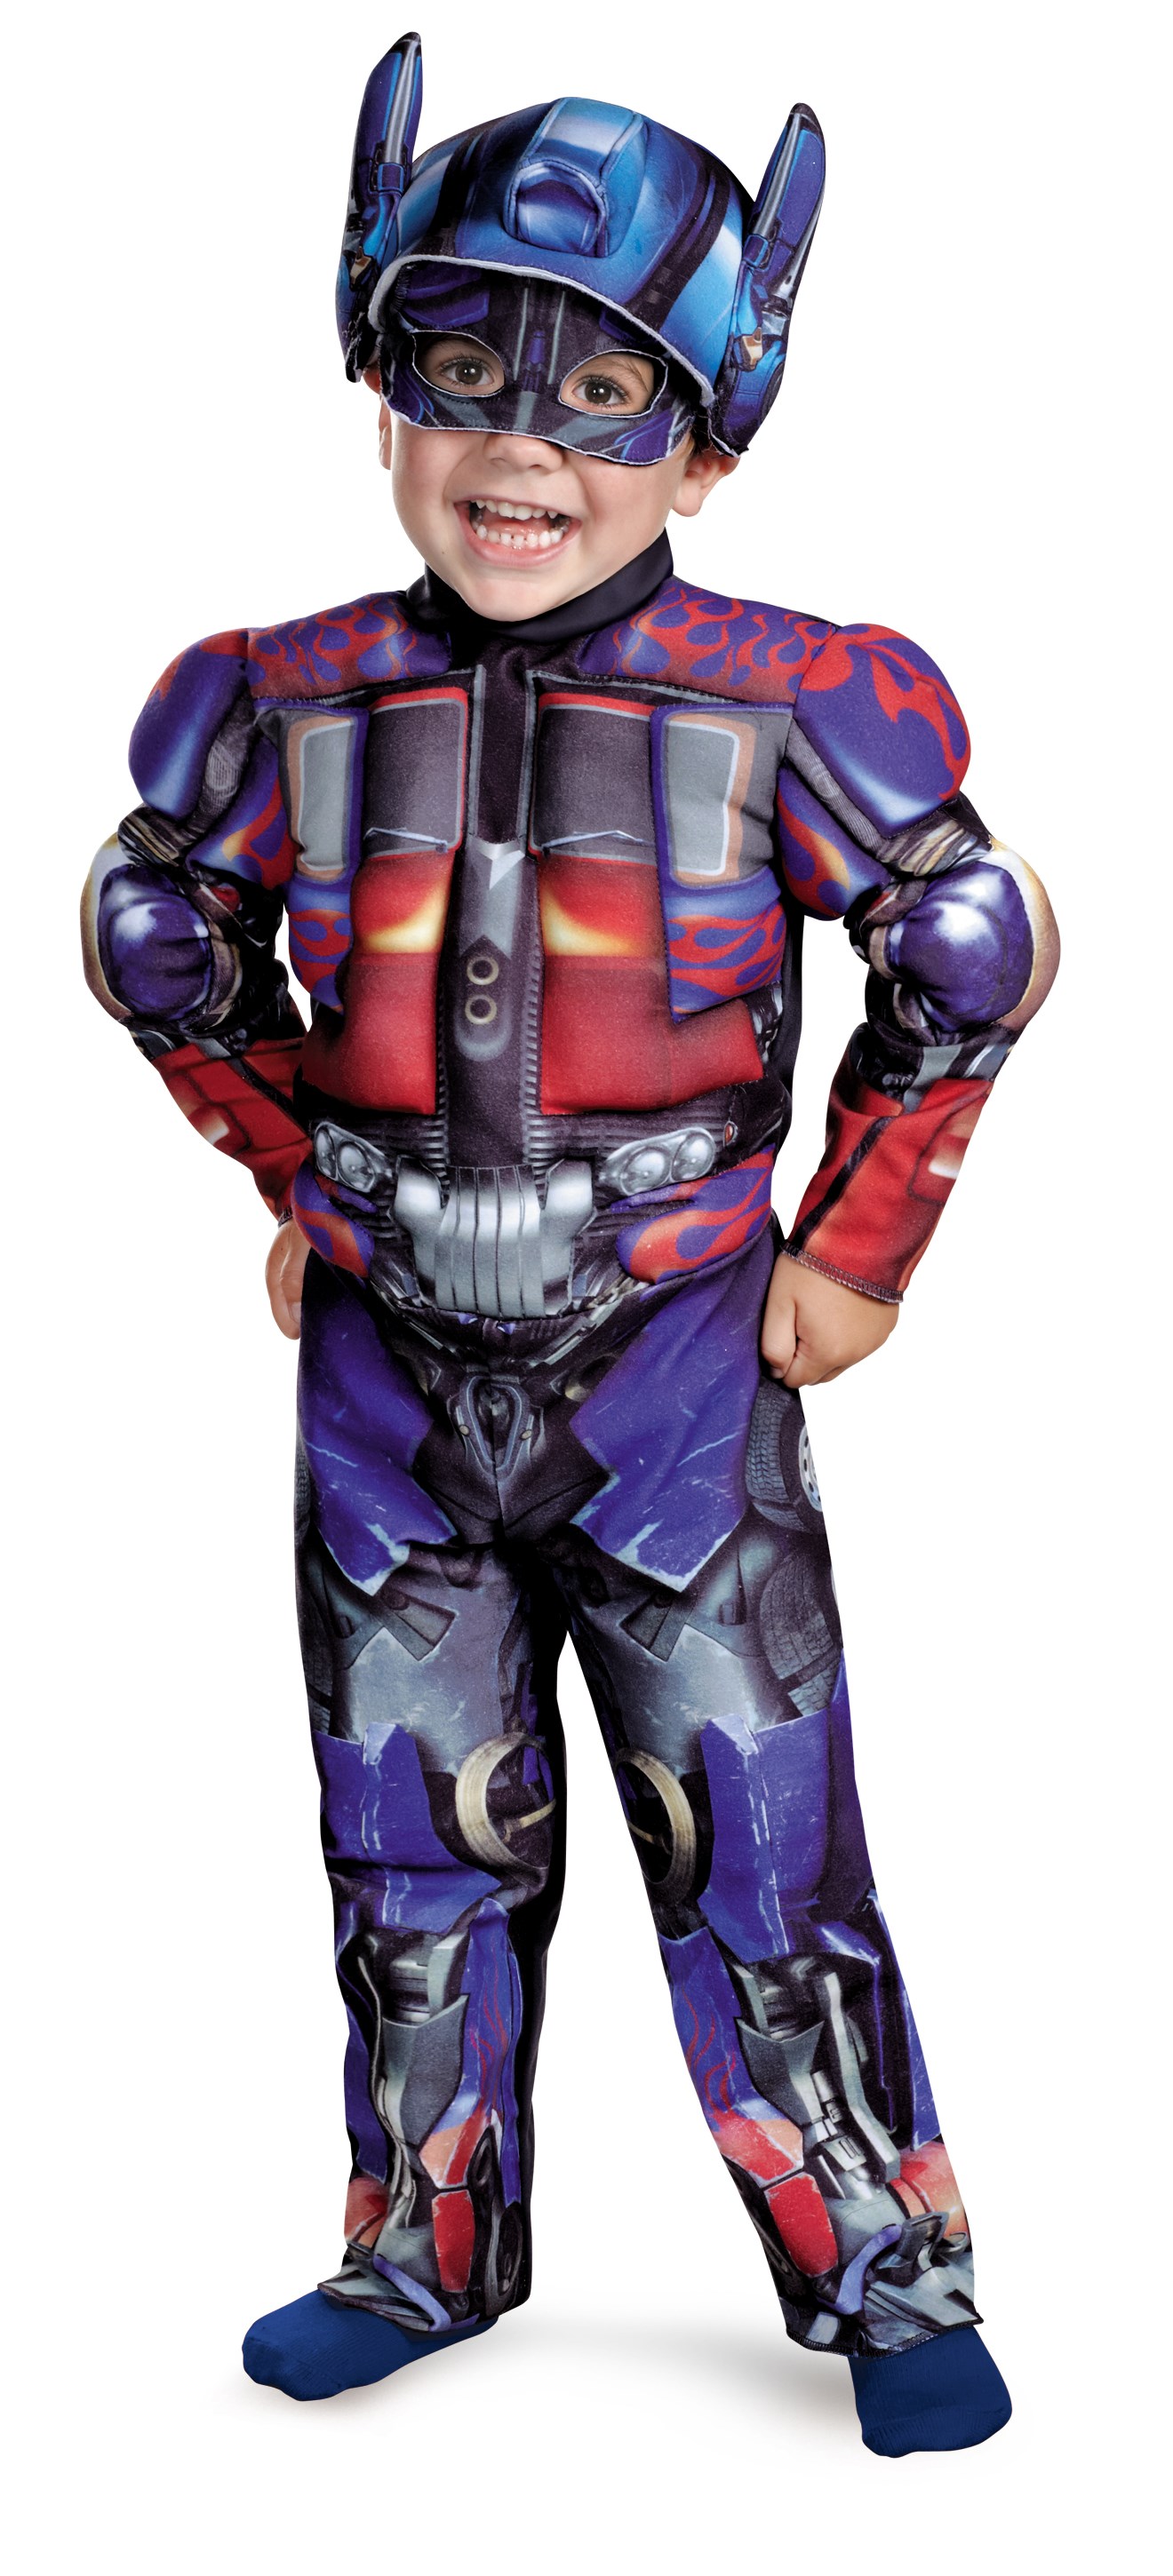 Transformers 3 Dark of the Moon Movie - Optimus Prime Muscle Toddler / Child Costume